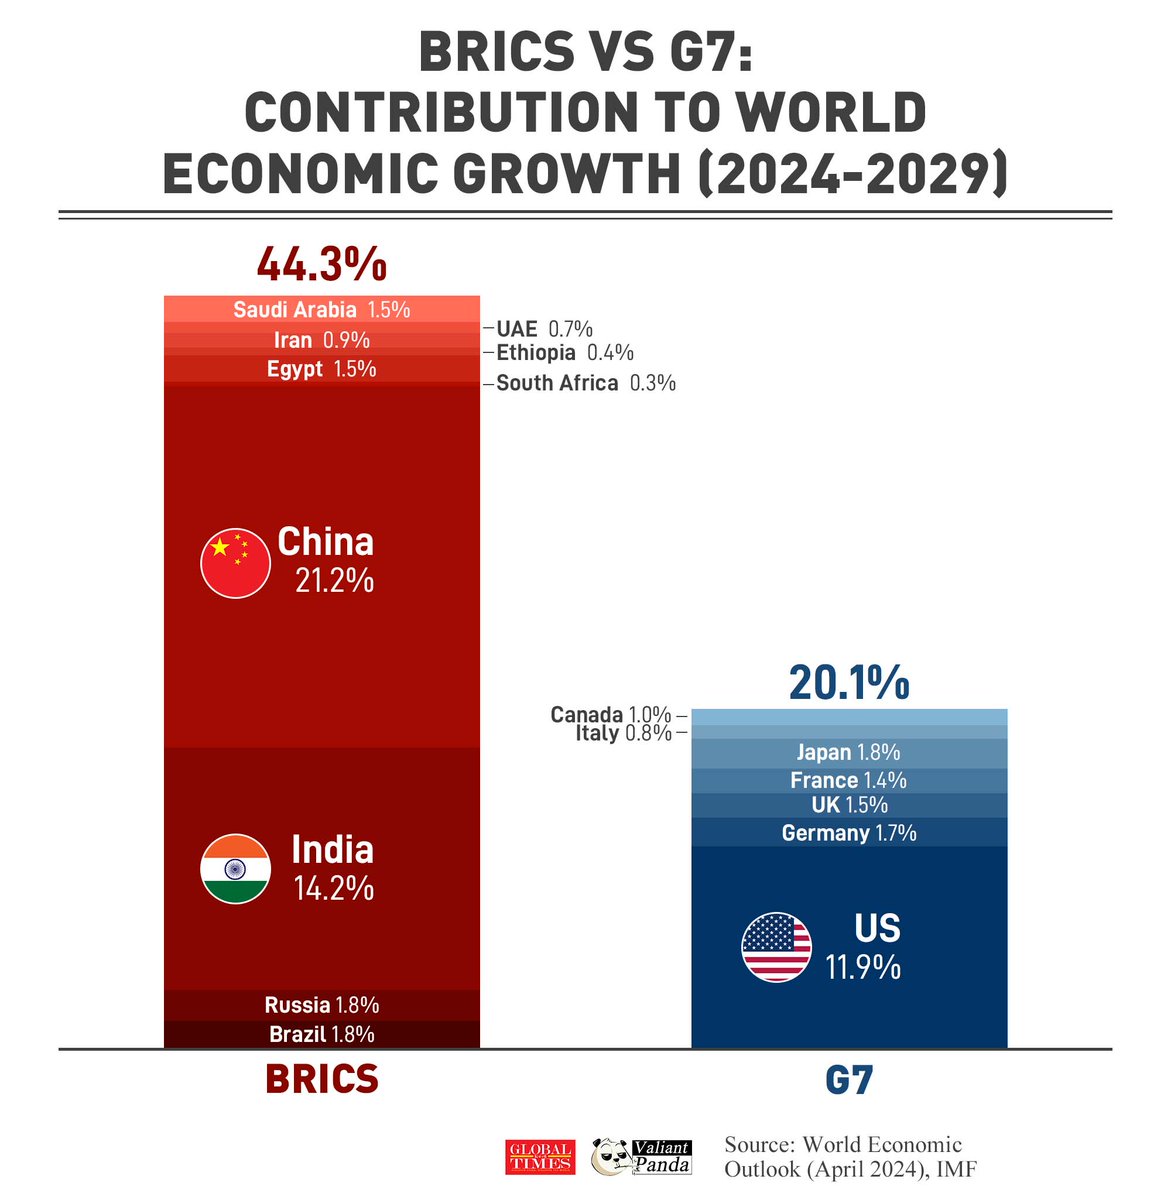 #BRICS countries are expected to contribute twice as much to the world economy as #G7 countries over the next five years. #China🇨🇳 and #India🇮🇳 alone account for more than a third of global growth.